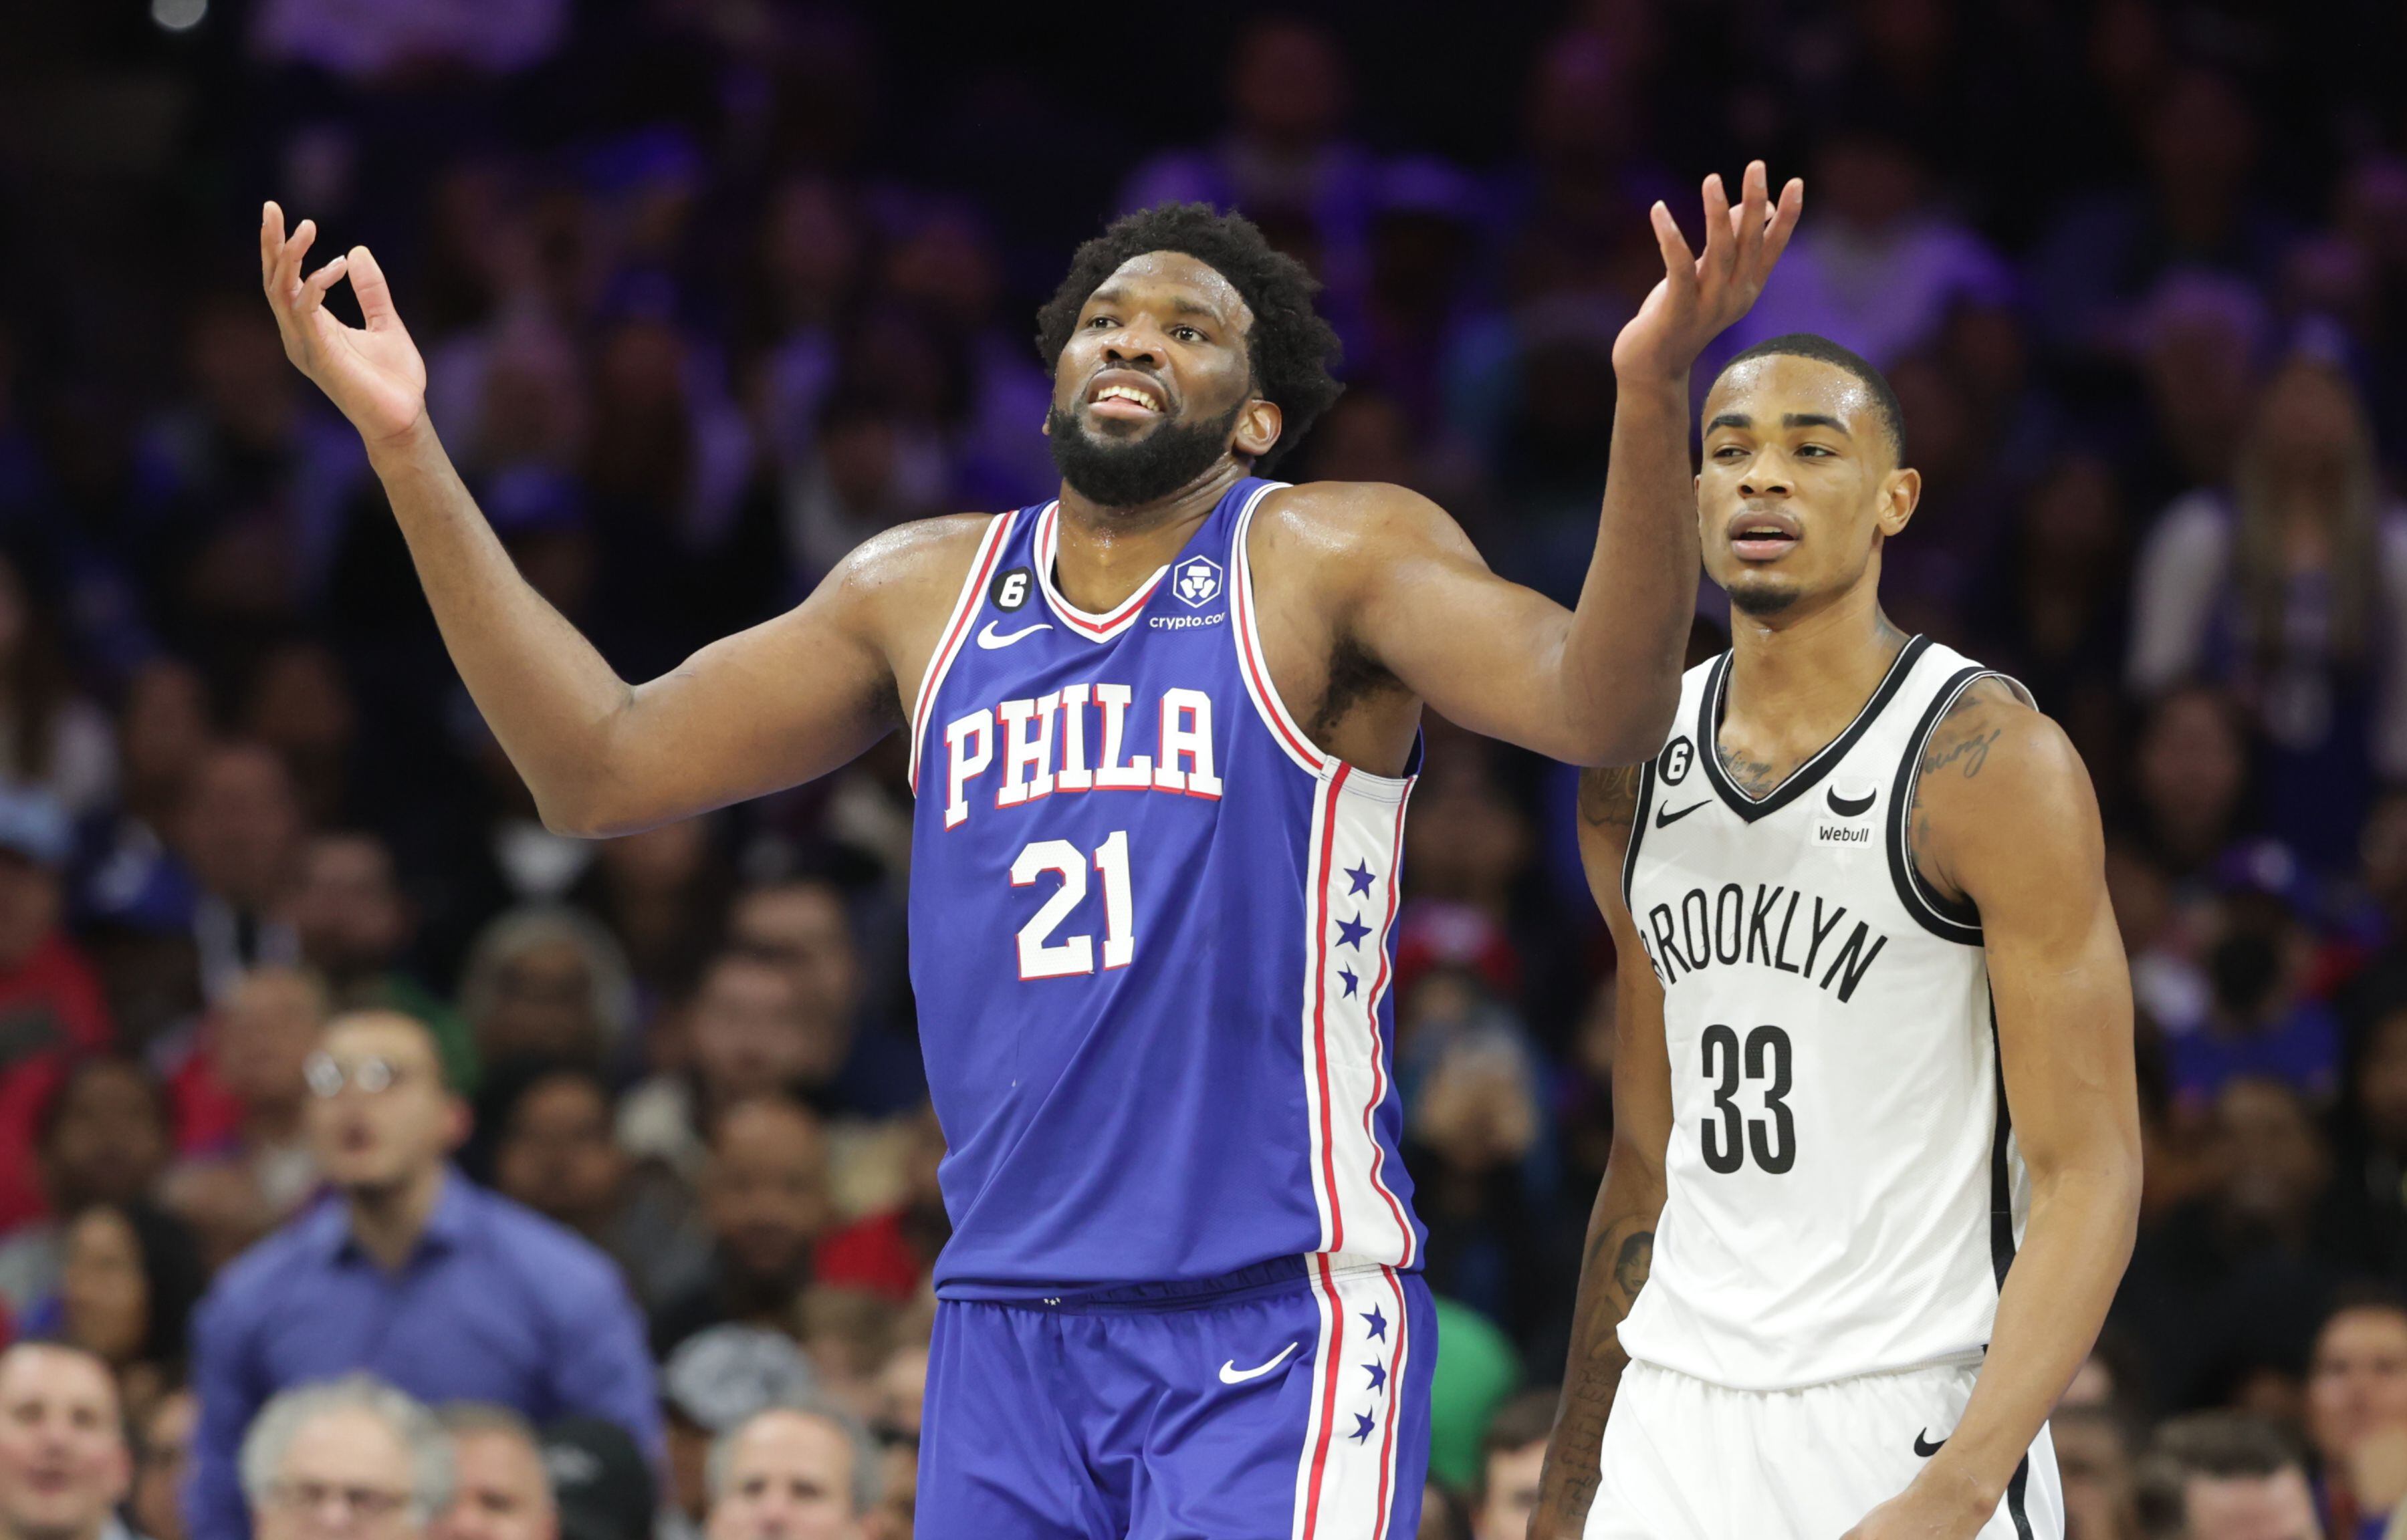 What's worked so well in the Sixers' wins over Warriors, Nets